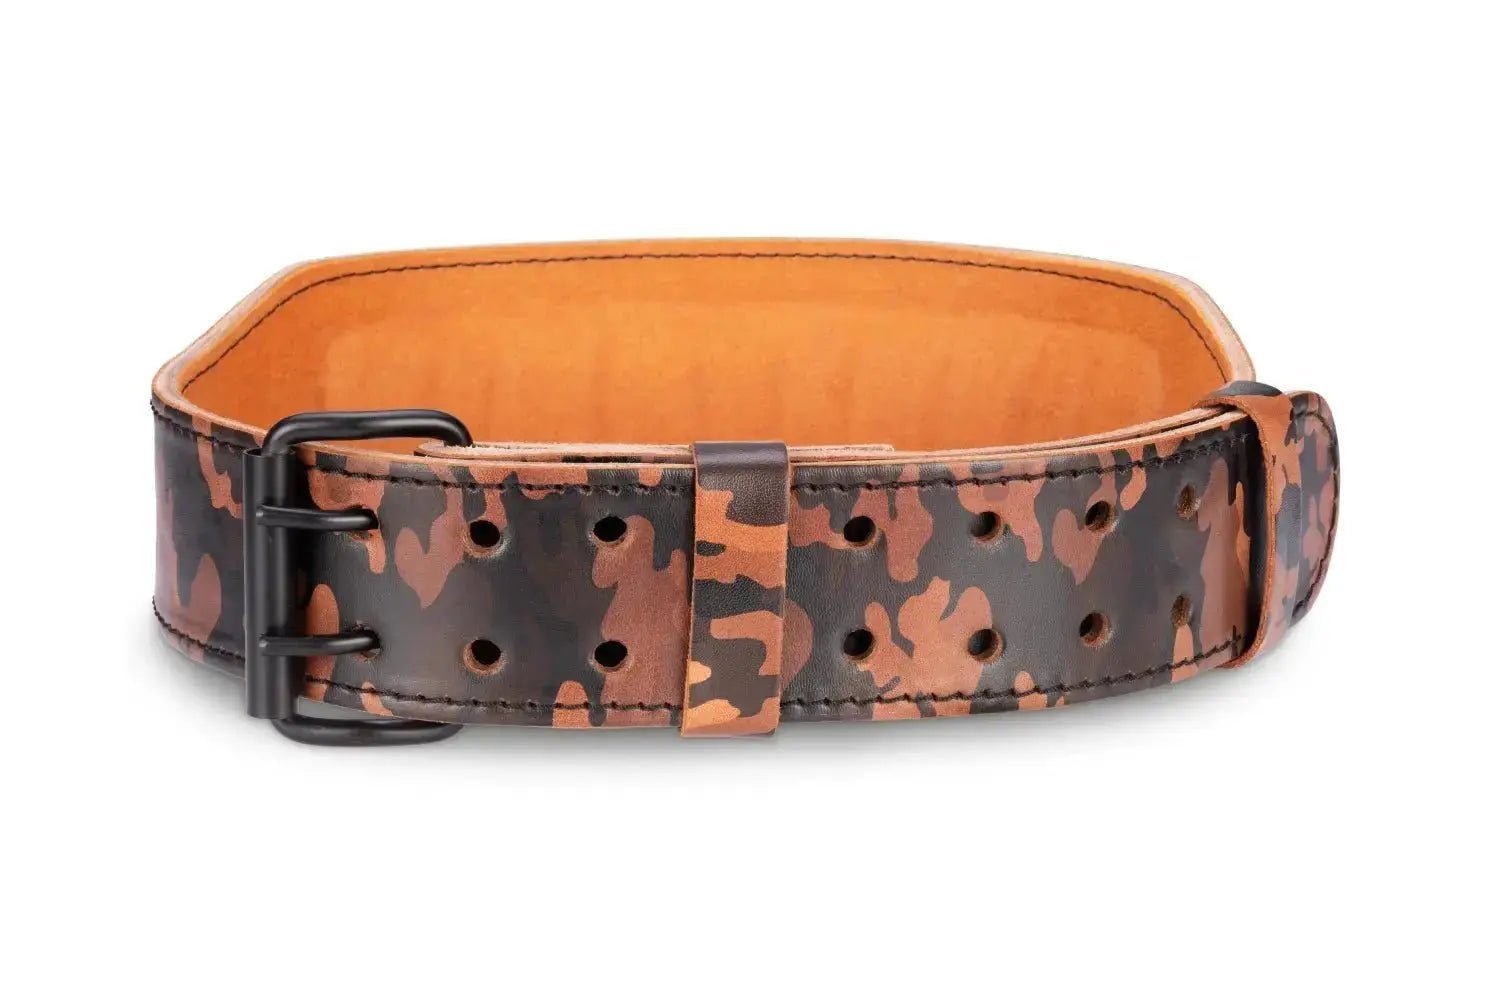 Clearance - Camo Apex 4 Inch Lifting Belt - Gunsmith Fitness